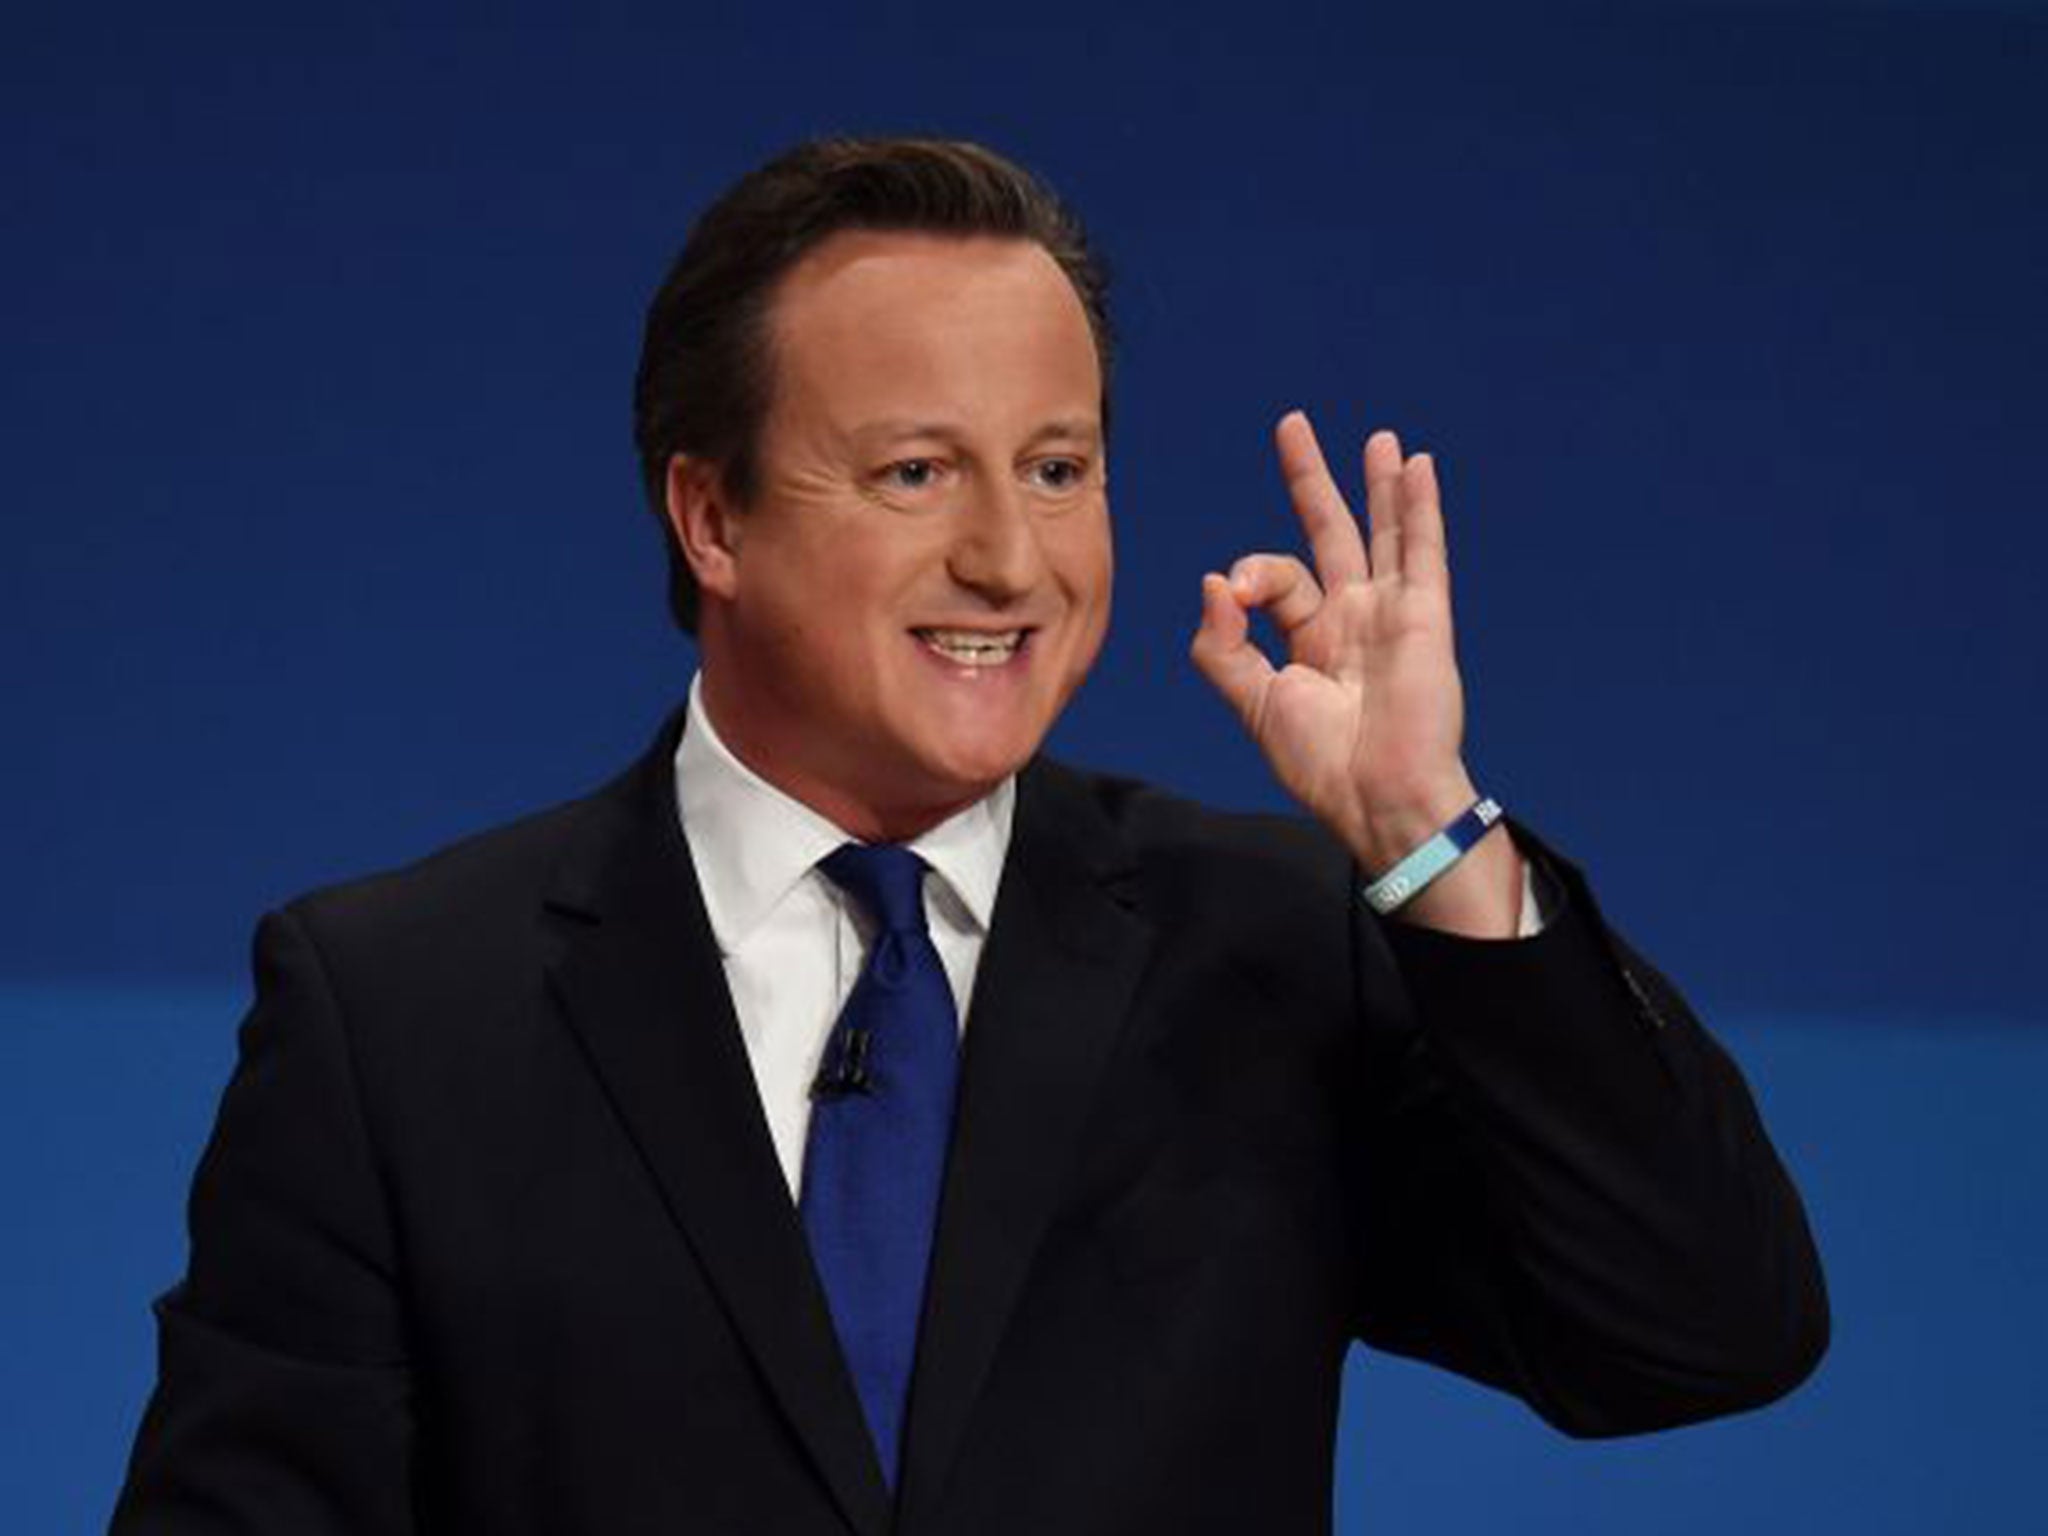 David Cameron used his speech to make a direct pitch to Ukip supporters as well as Eurosceptic Tories